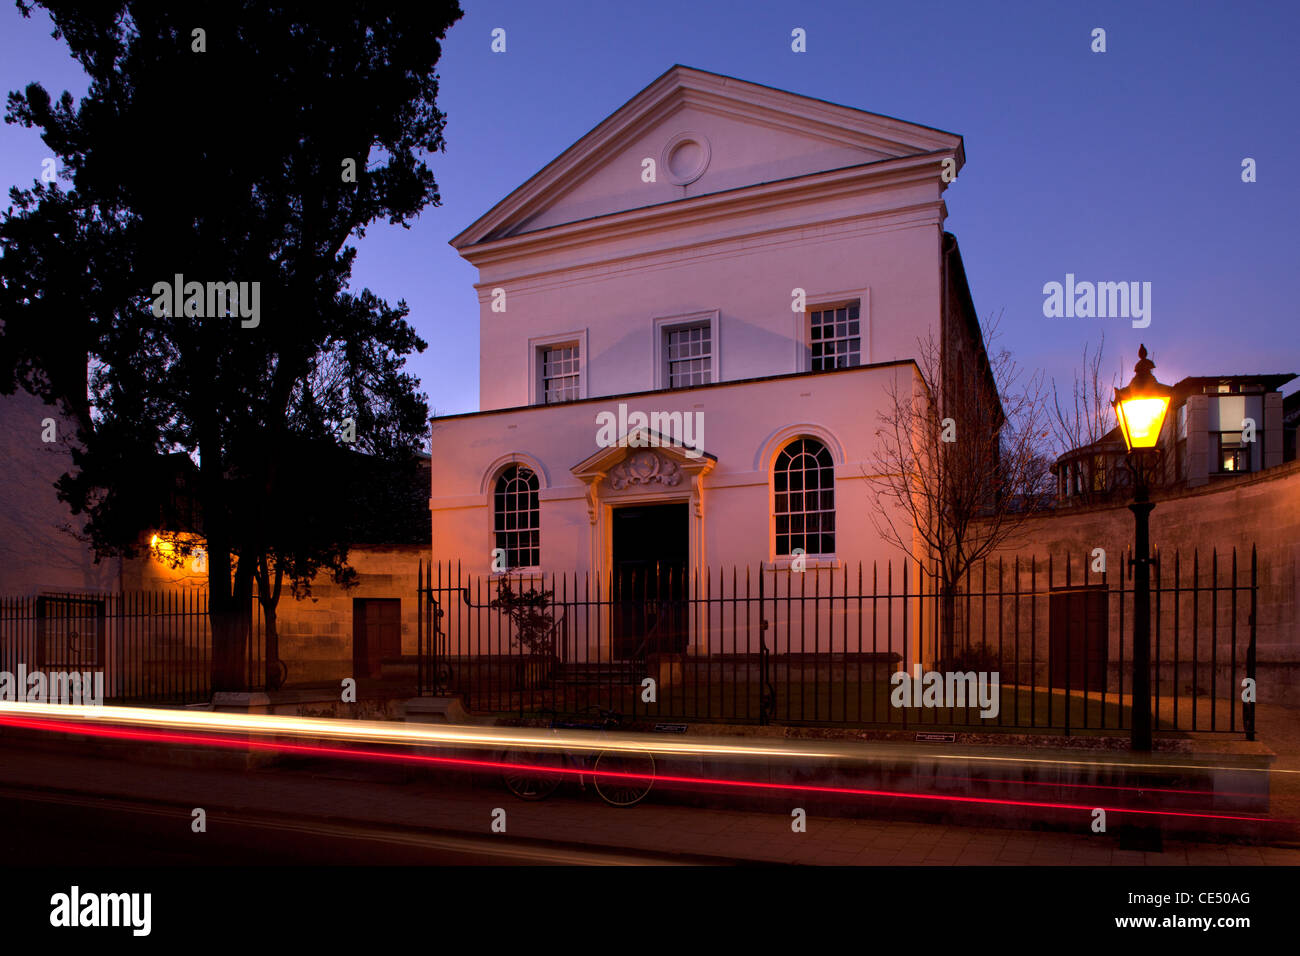 Holywell musica camere a notte, Oxford, Inghilterra Foto Stock